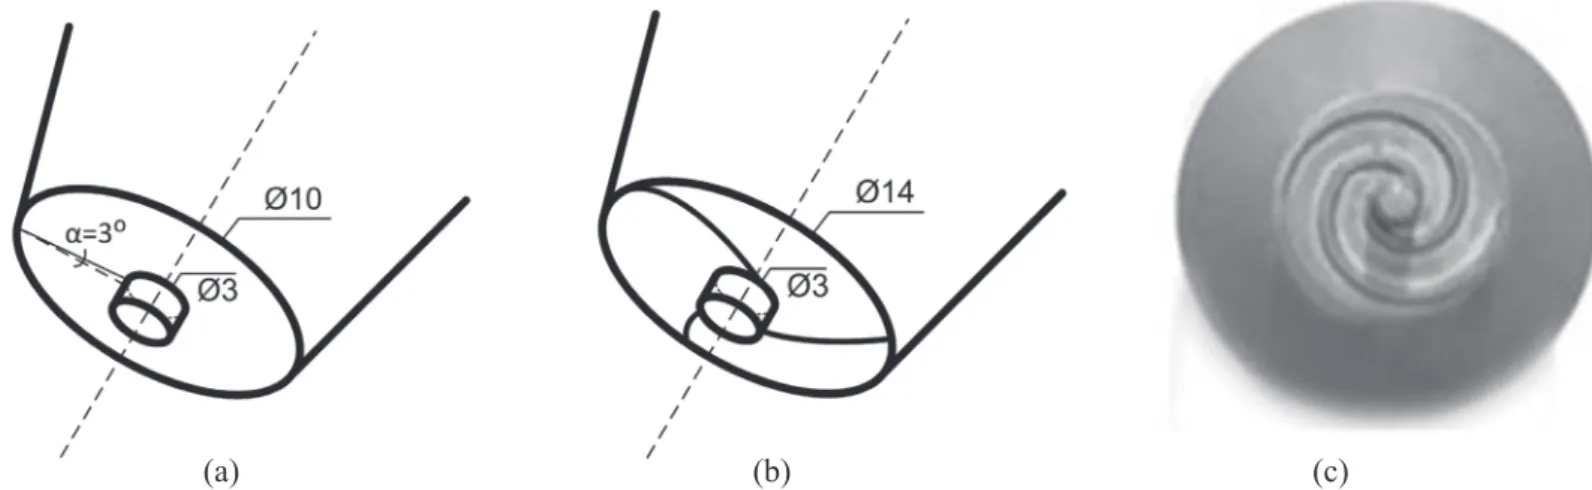 Figure 2 - Scheme of a C10 Conical tool (a) and scheme (b) and picture (c) of a S14 Scrolled tool.